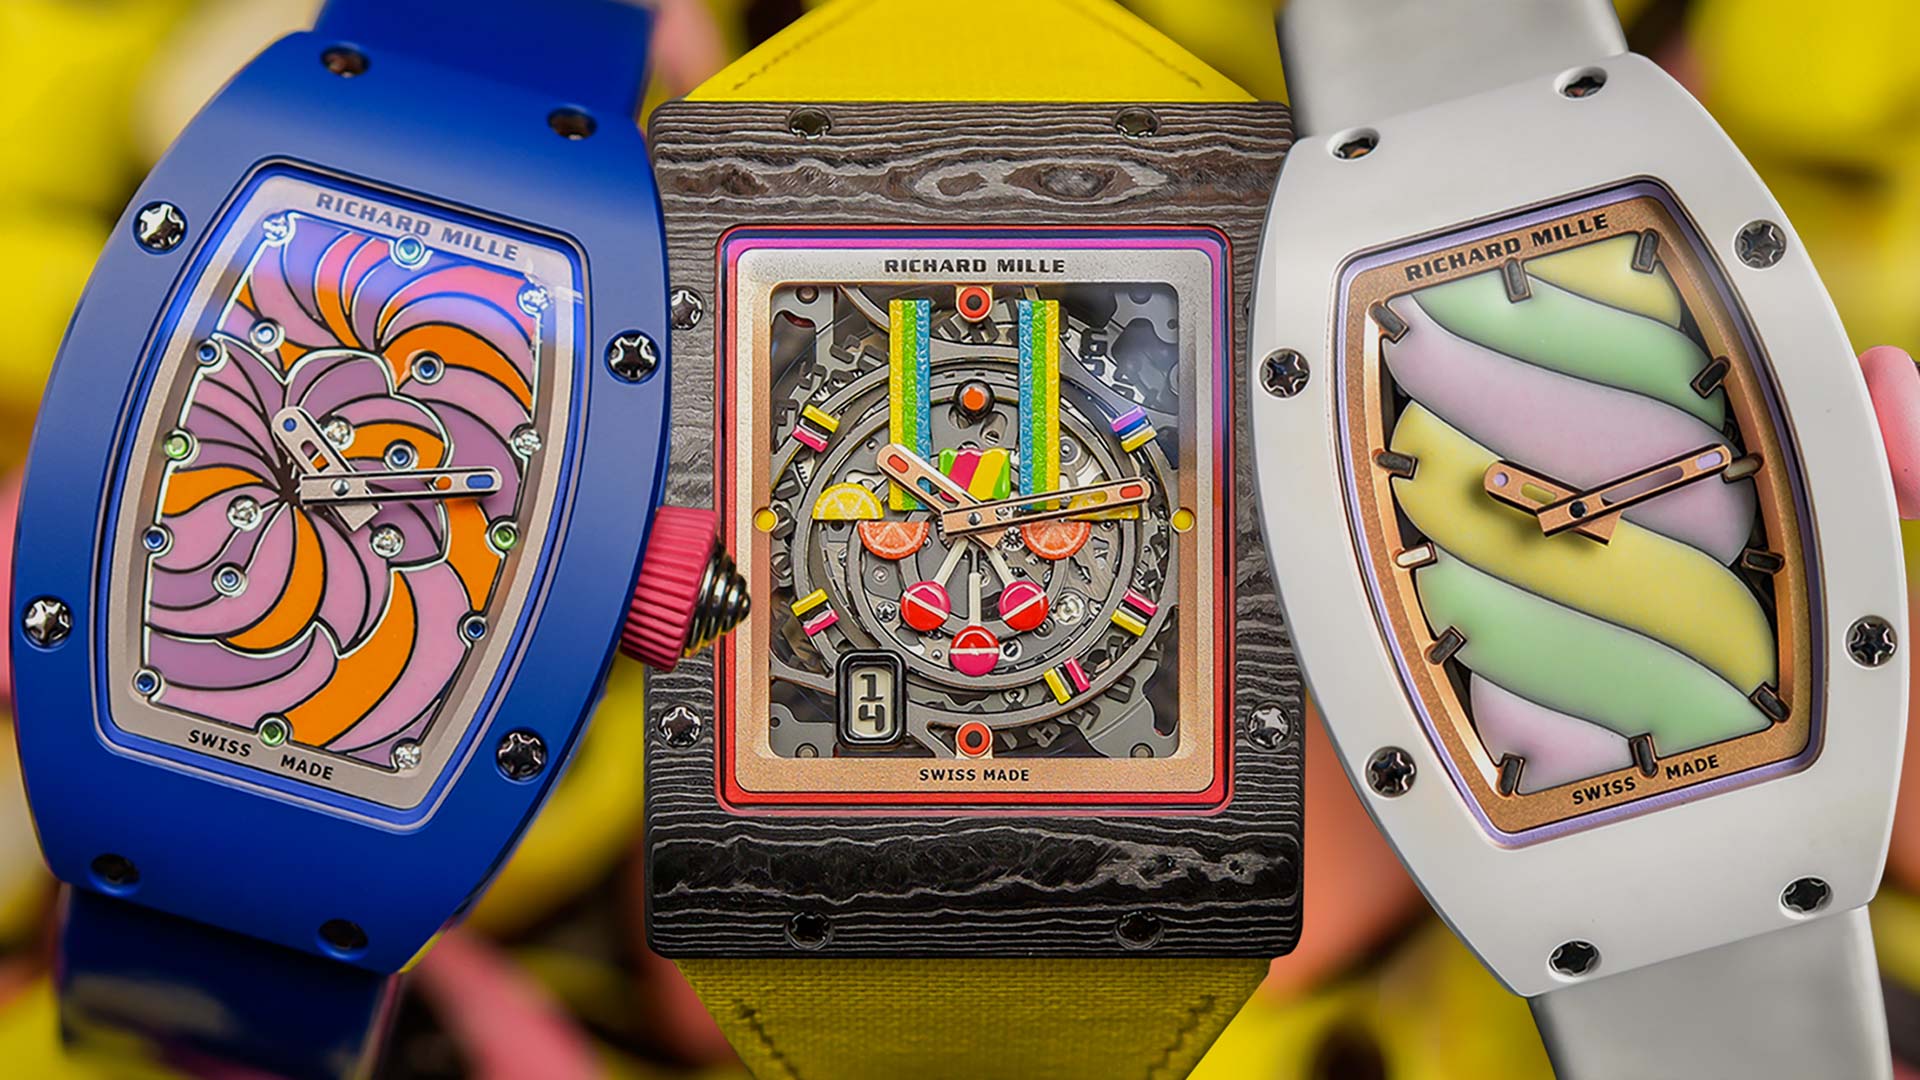 Hands-On With The Richard Mille Bonbon Collection RM 07-03 Cupcake, RM 07-03 Marshmallow, And RM 16-01 Fraise Watches